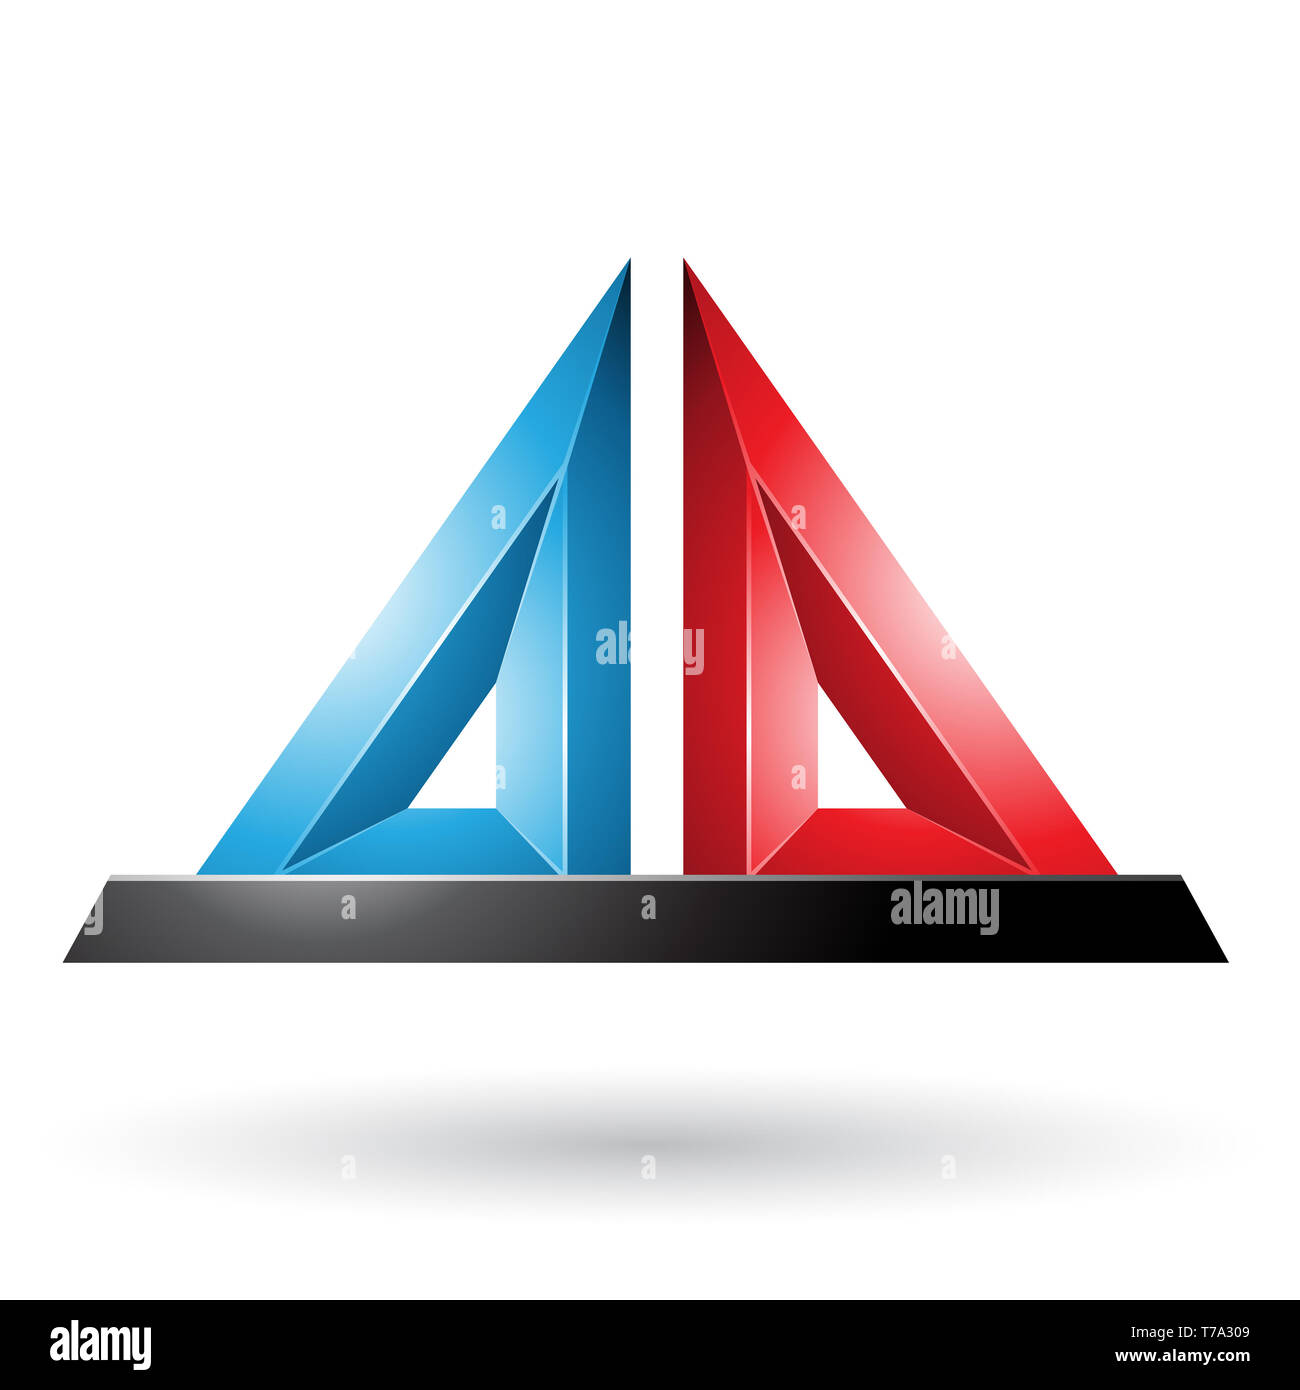 Vector Illustration of Blue and Red 3d Pyramidical Embossed Shape isolated on a White Background Stock Photo